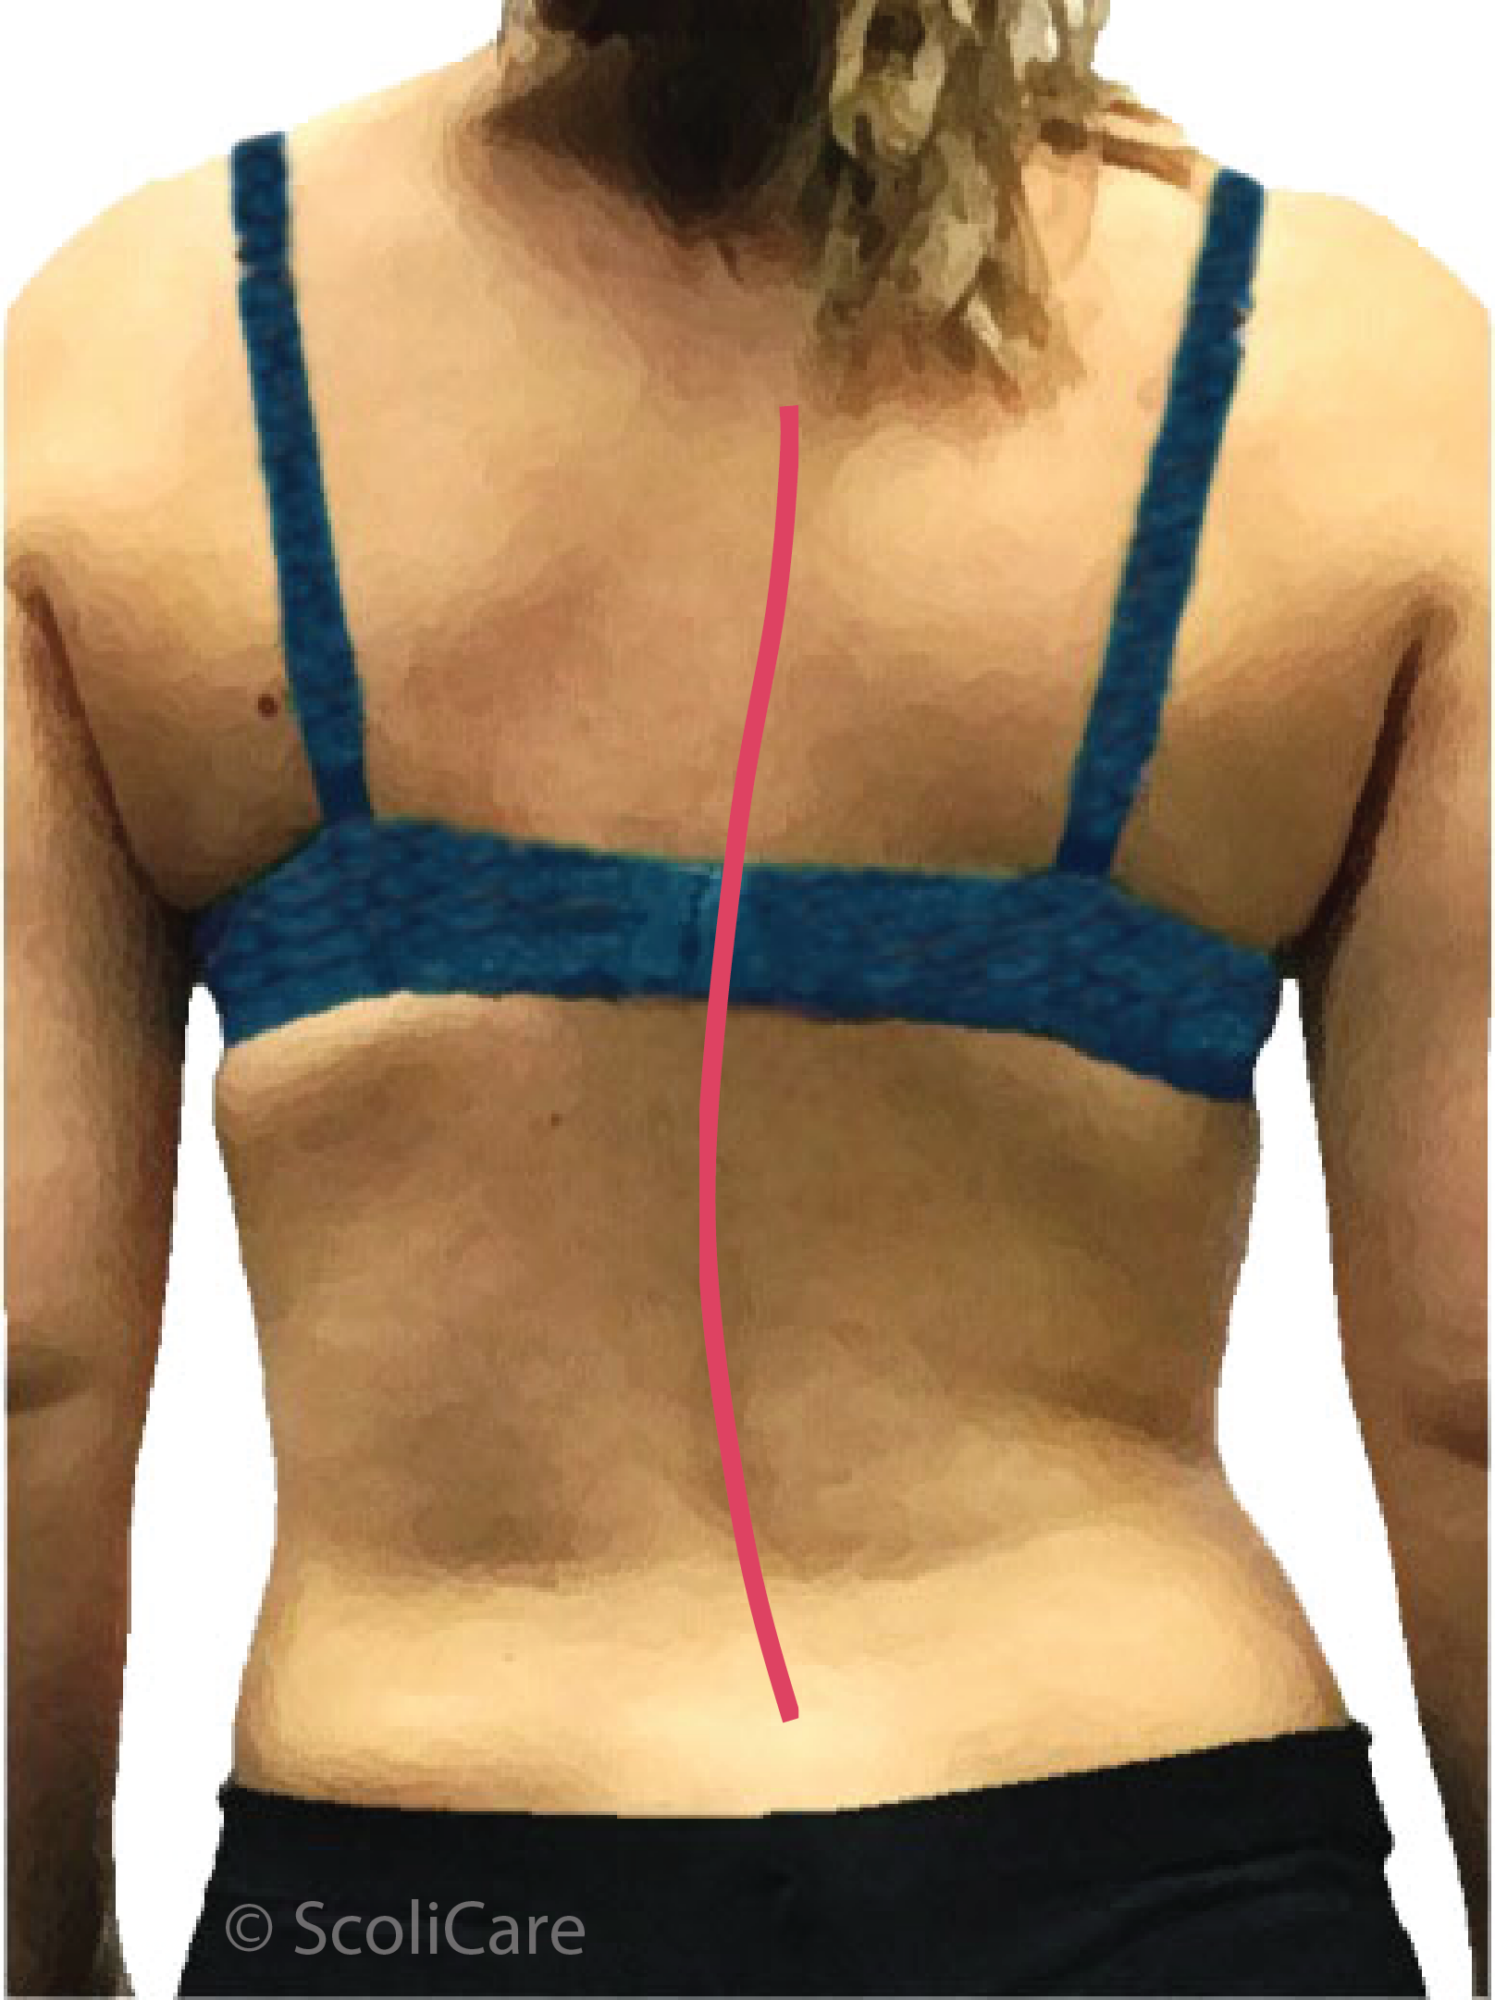 a young woman with visible scoliosis curve development